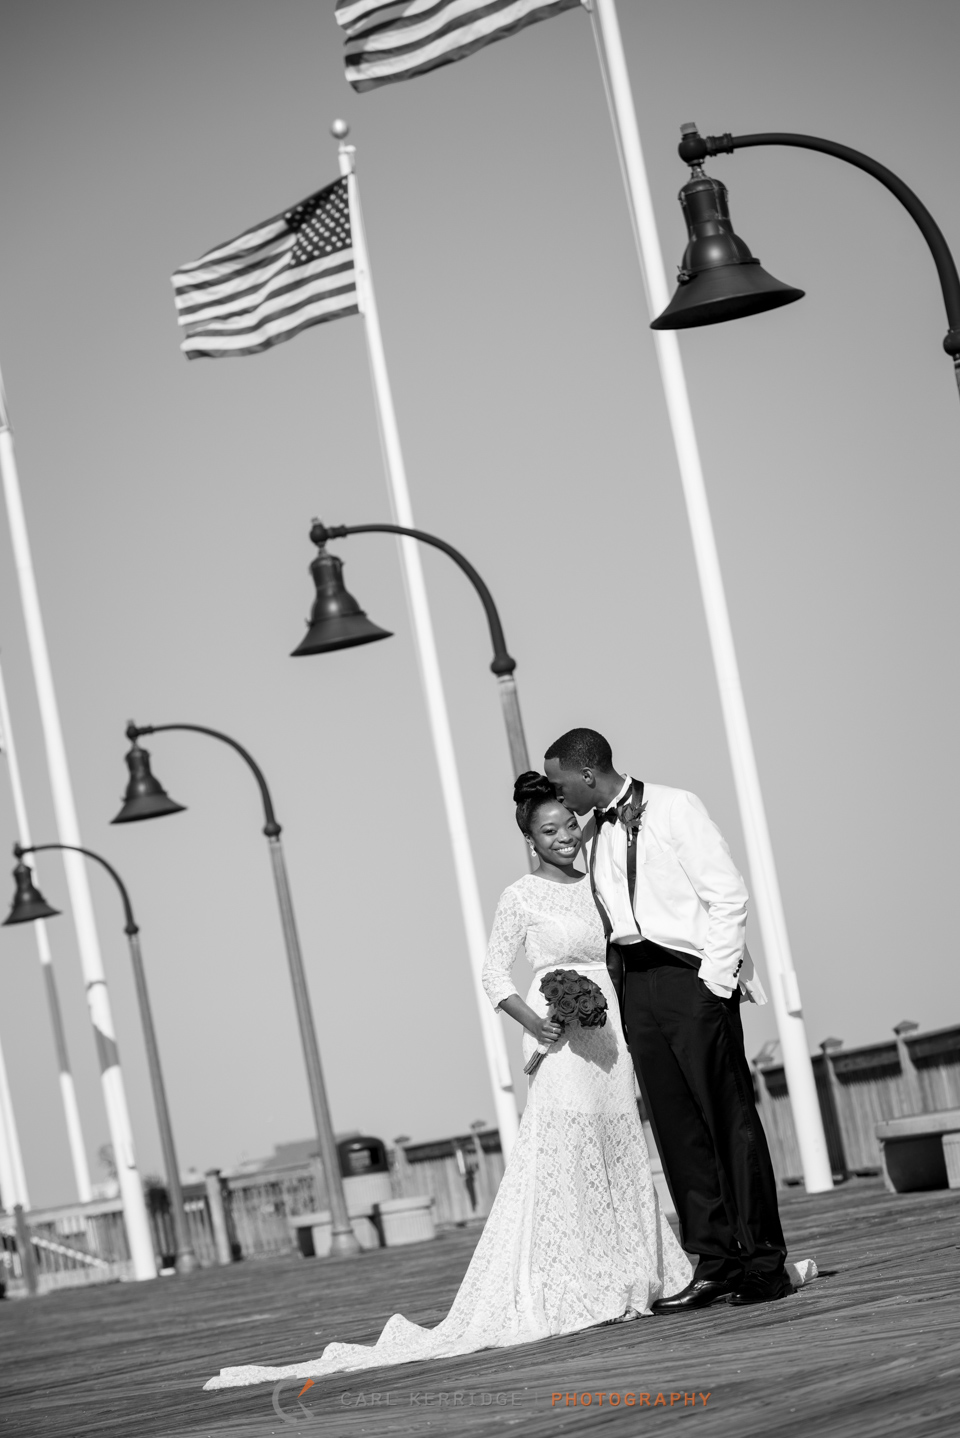 Black and white posed couple on the Myrtle Beach Boardwalk